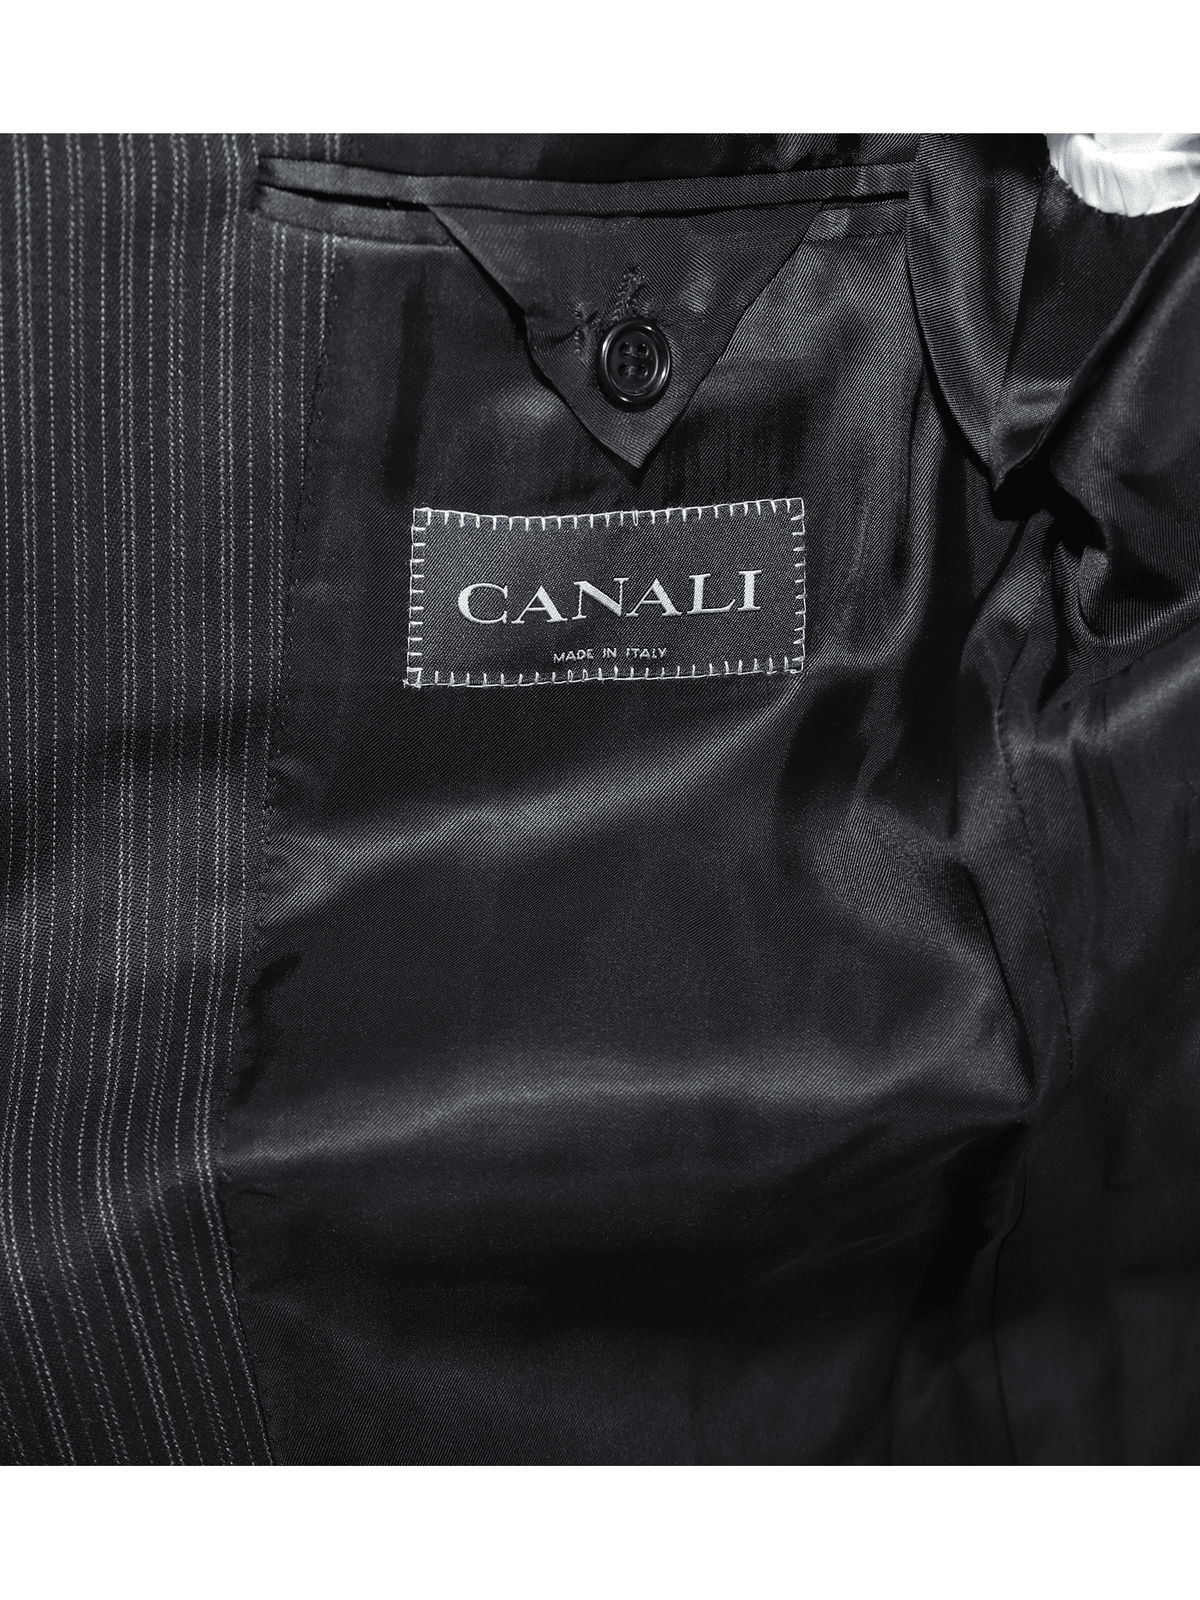 Canali SUITS Canali 38r 46 Drop 6 Classic Fit Black Striped 3-button Pleated 100% Wool Suit